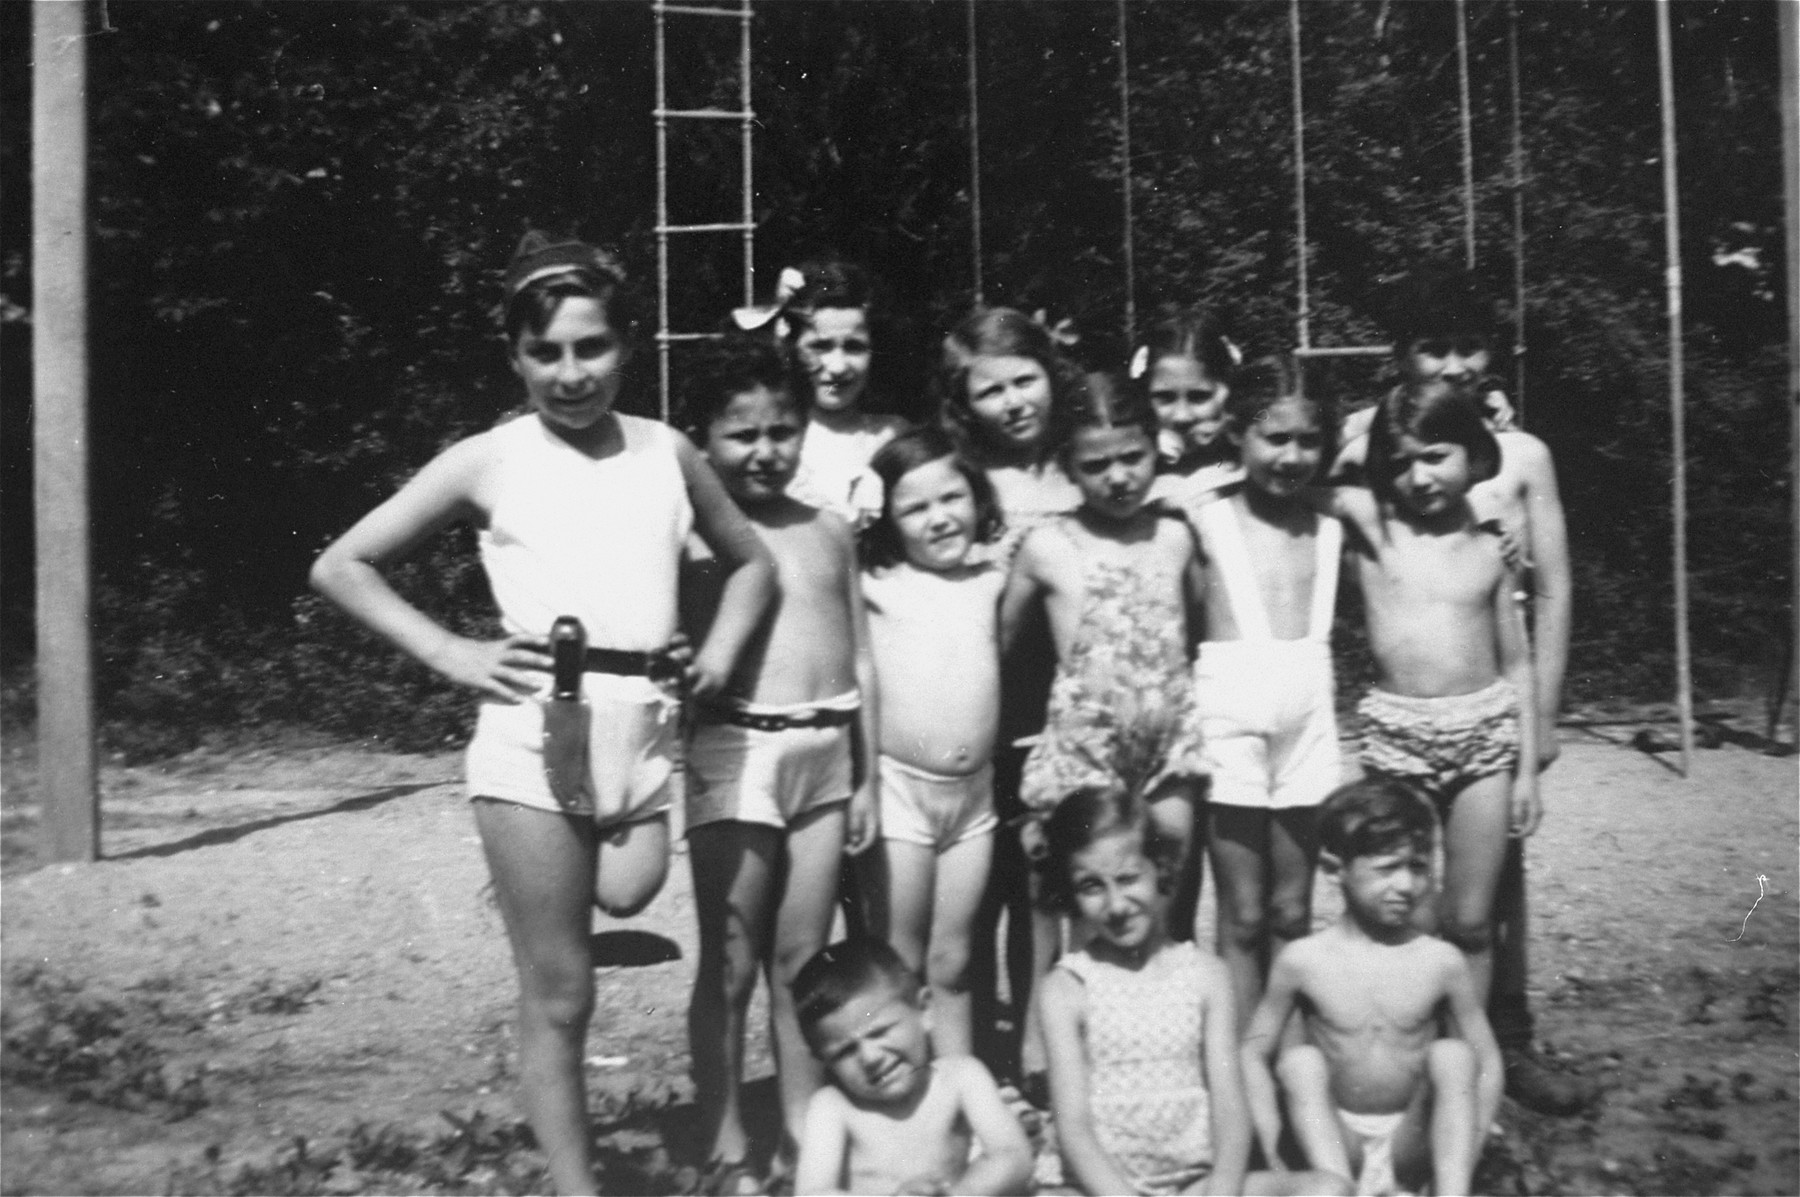 Group photograph taken at an orphanage for Jewish children in Verneuil. 

Among these children is Evi Weisz.